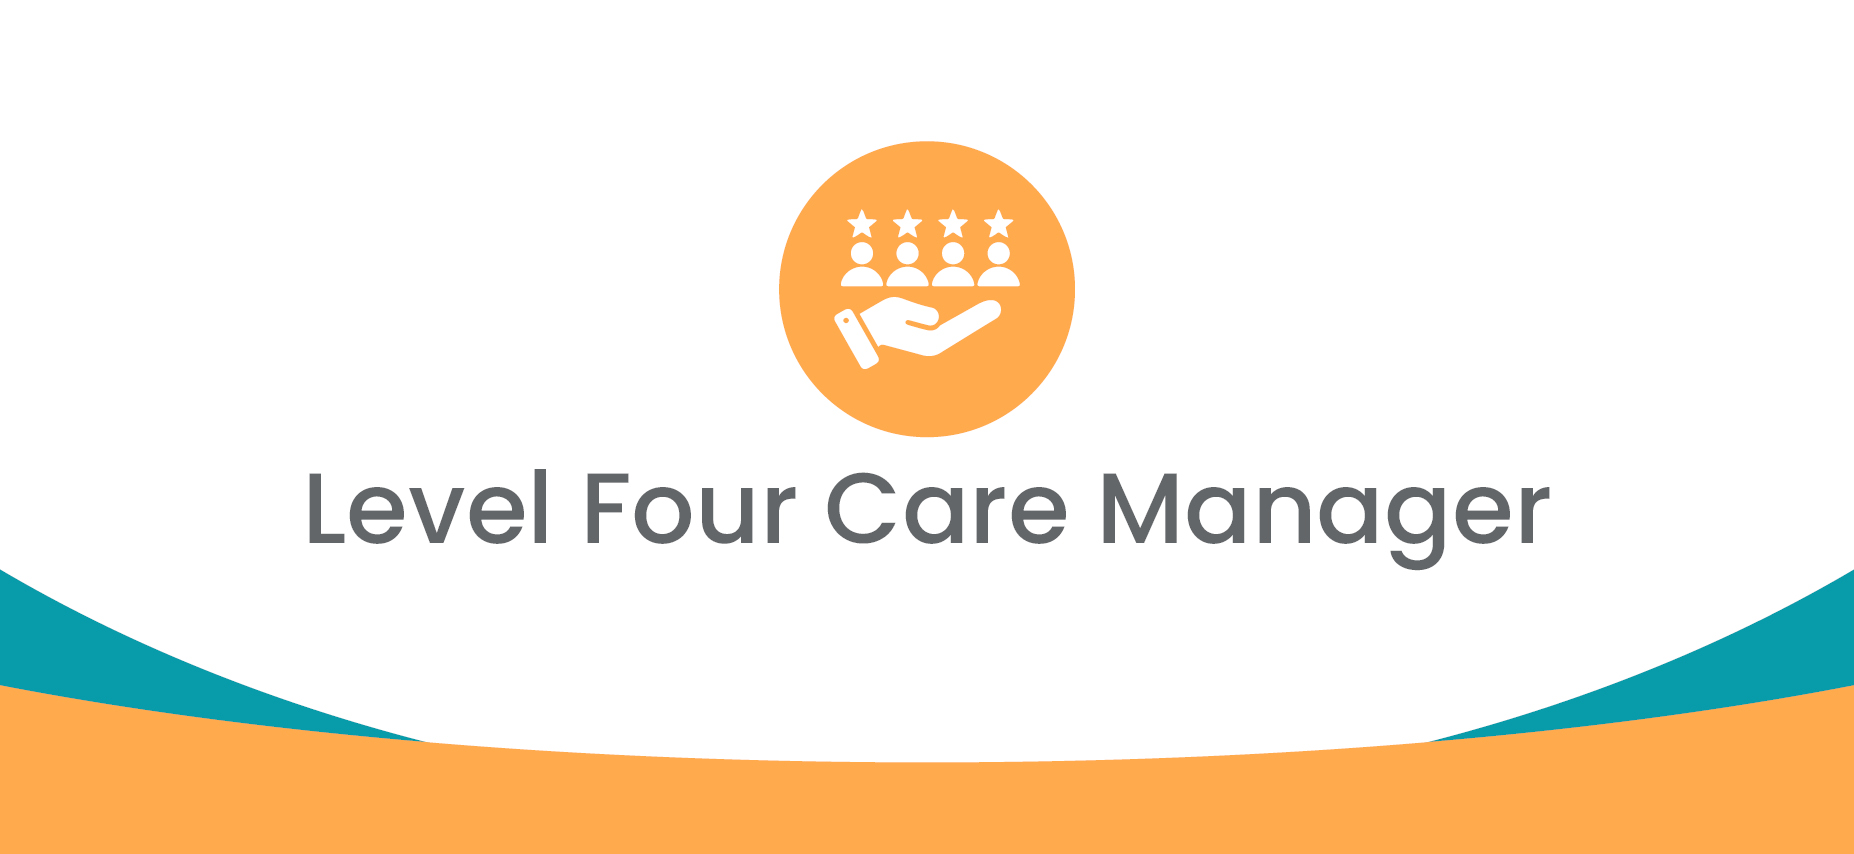 Level Four Care Manager